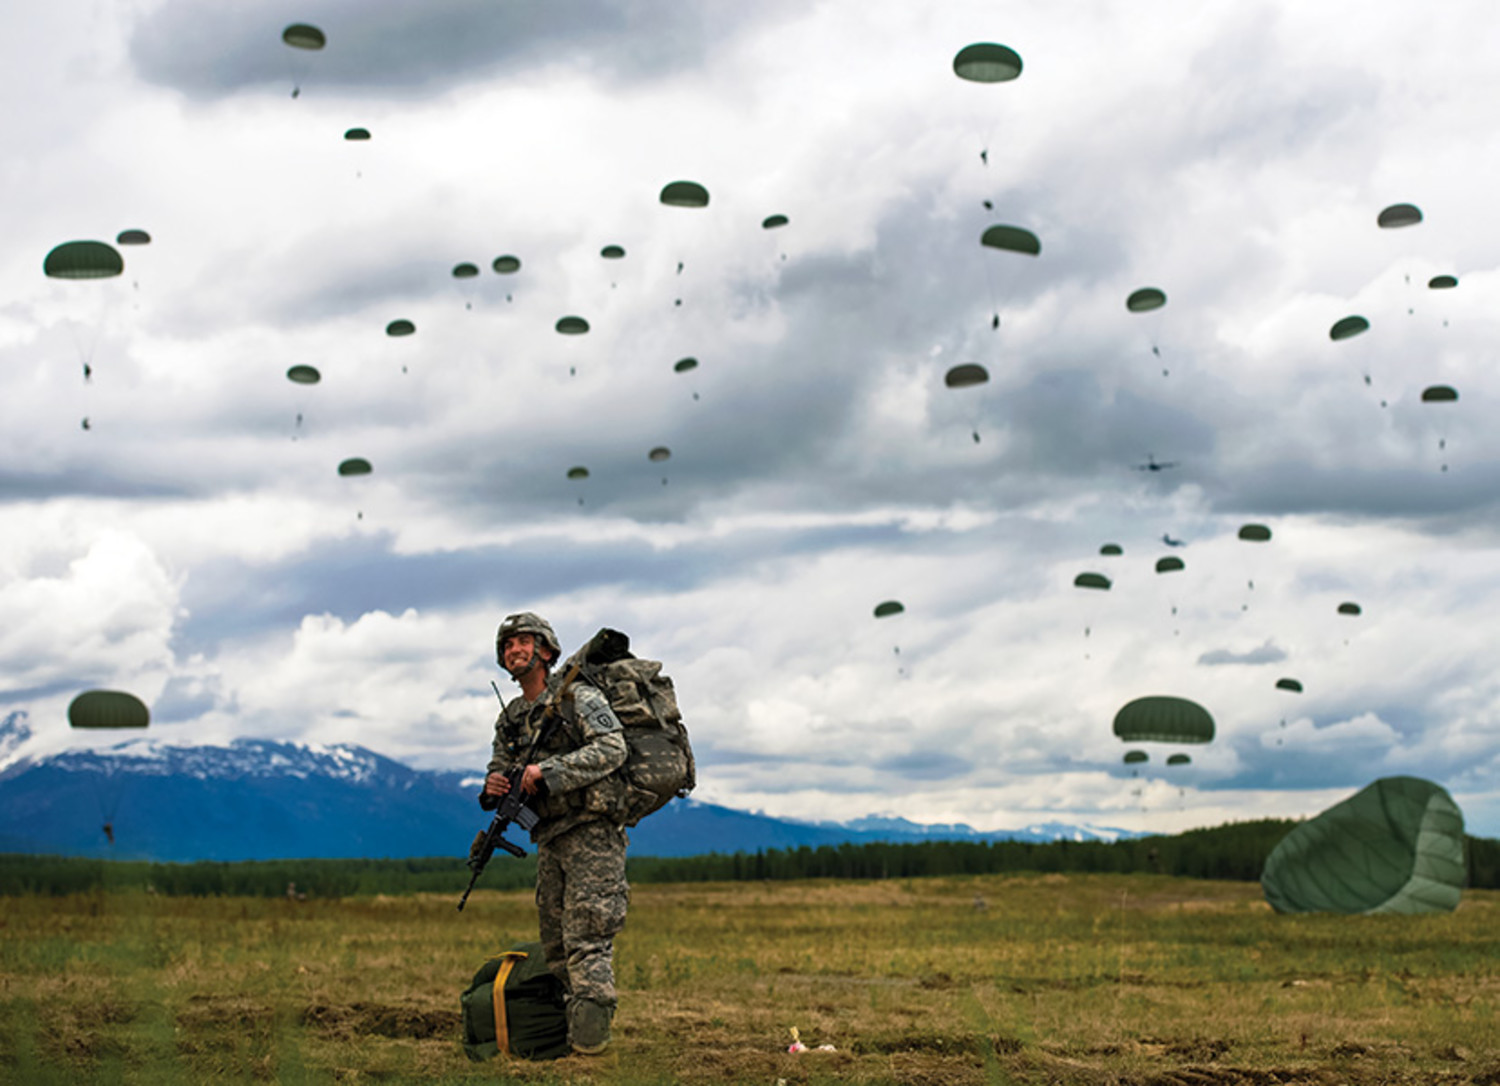 Staff Sgt. Otis Lee watches from the grounds as other Army paratroopers come down onto the Malemute Drop Zone. Soldiers from the 4th Brigade Combat Team, 25th Infantry Division (Airborne) conducted a mass tactical training exercise at the Malemute Drop Zone on Joint Base Elmendorf-Richardson on June 4, 2013. About 550 paratroopers jumped from C-17 aircraft during the exercise.